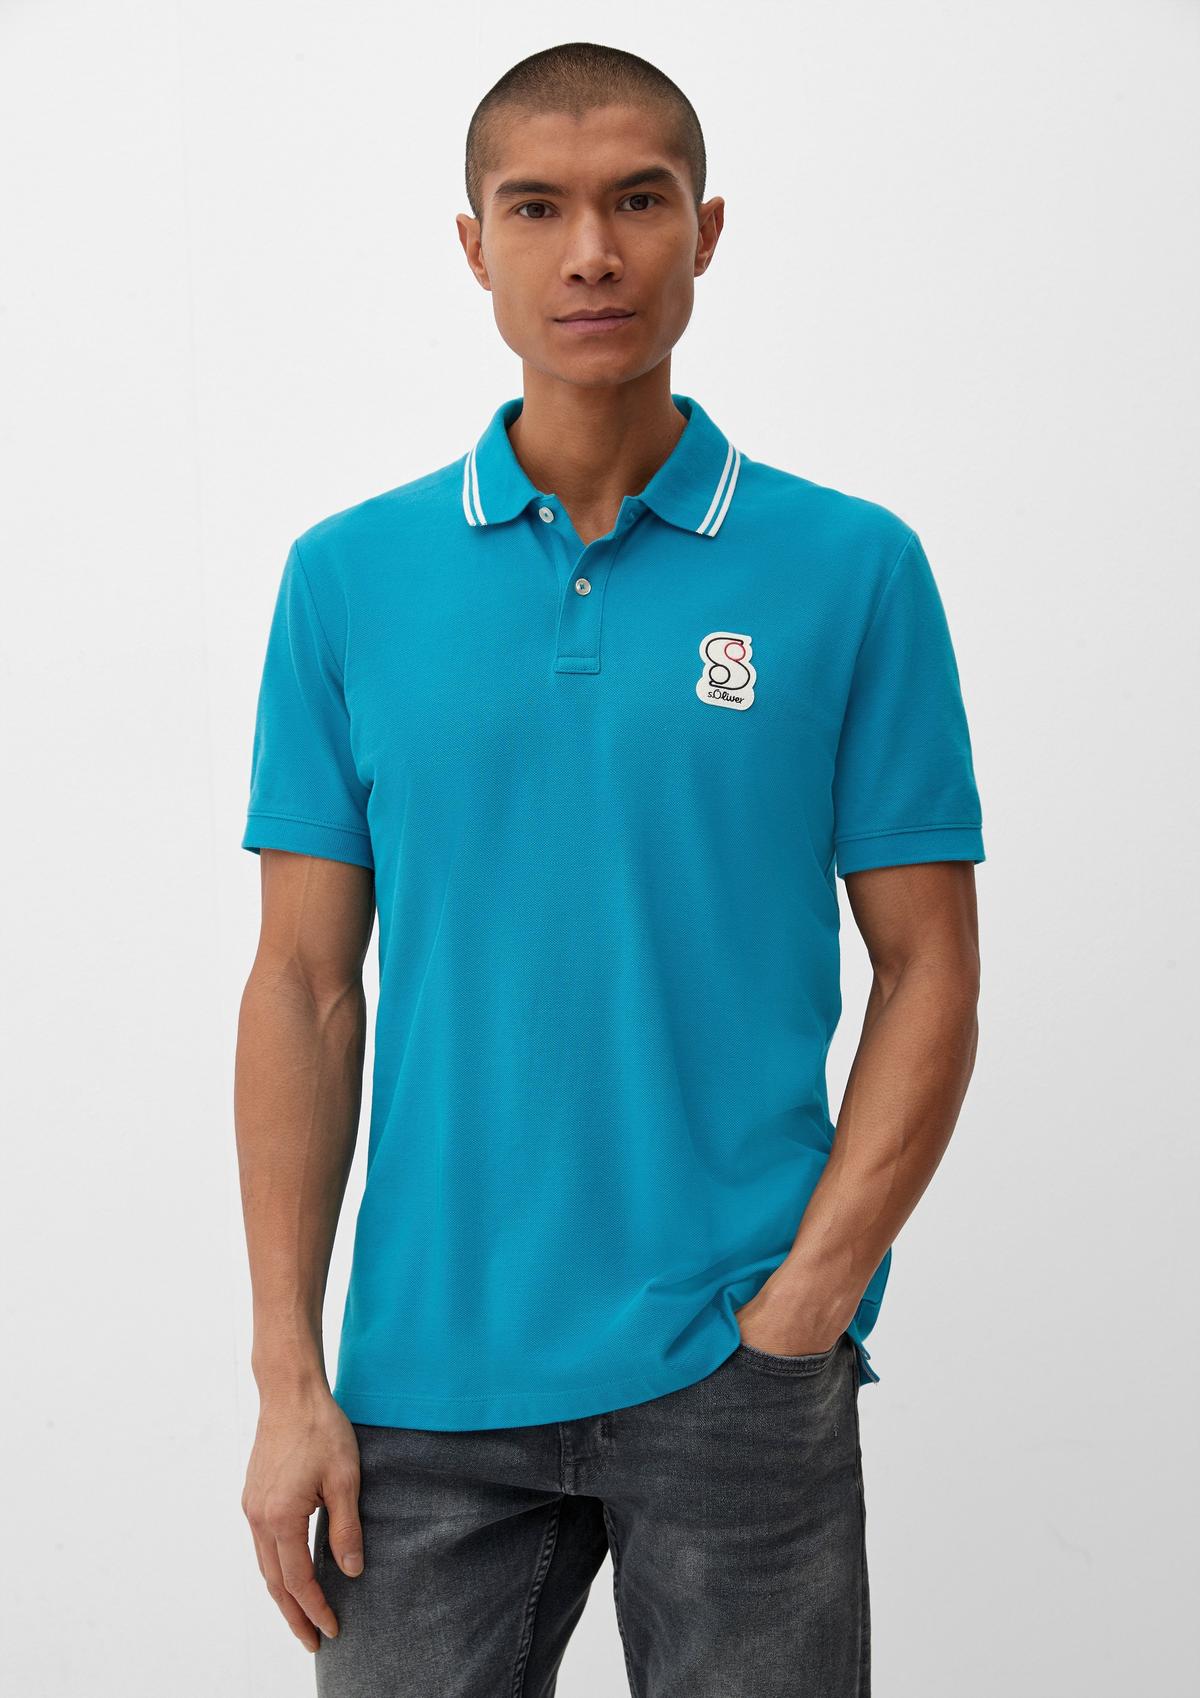 Polo shirt with - white embroidery logo